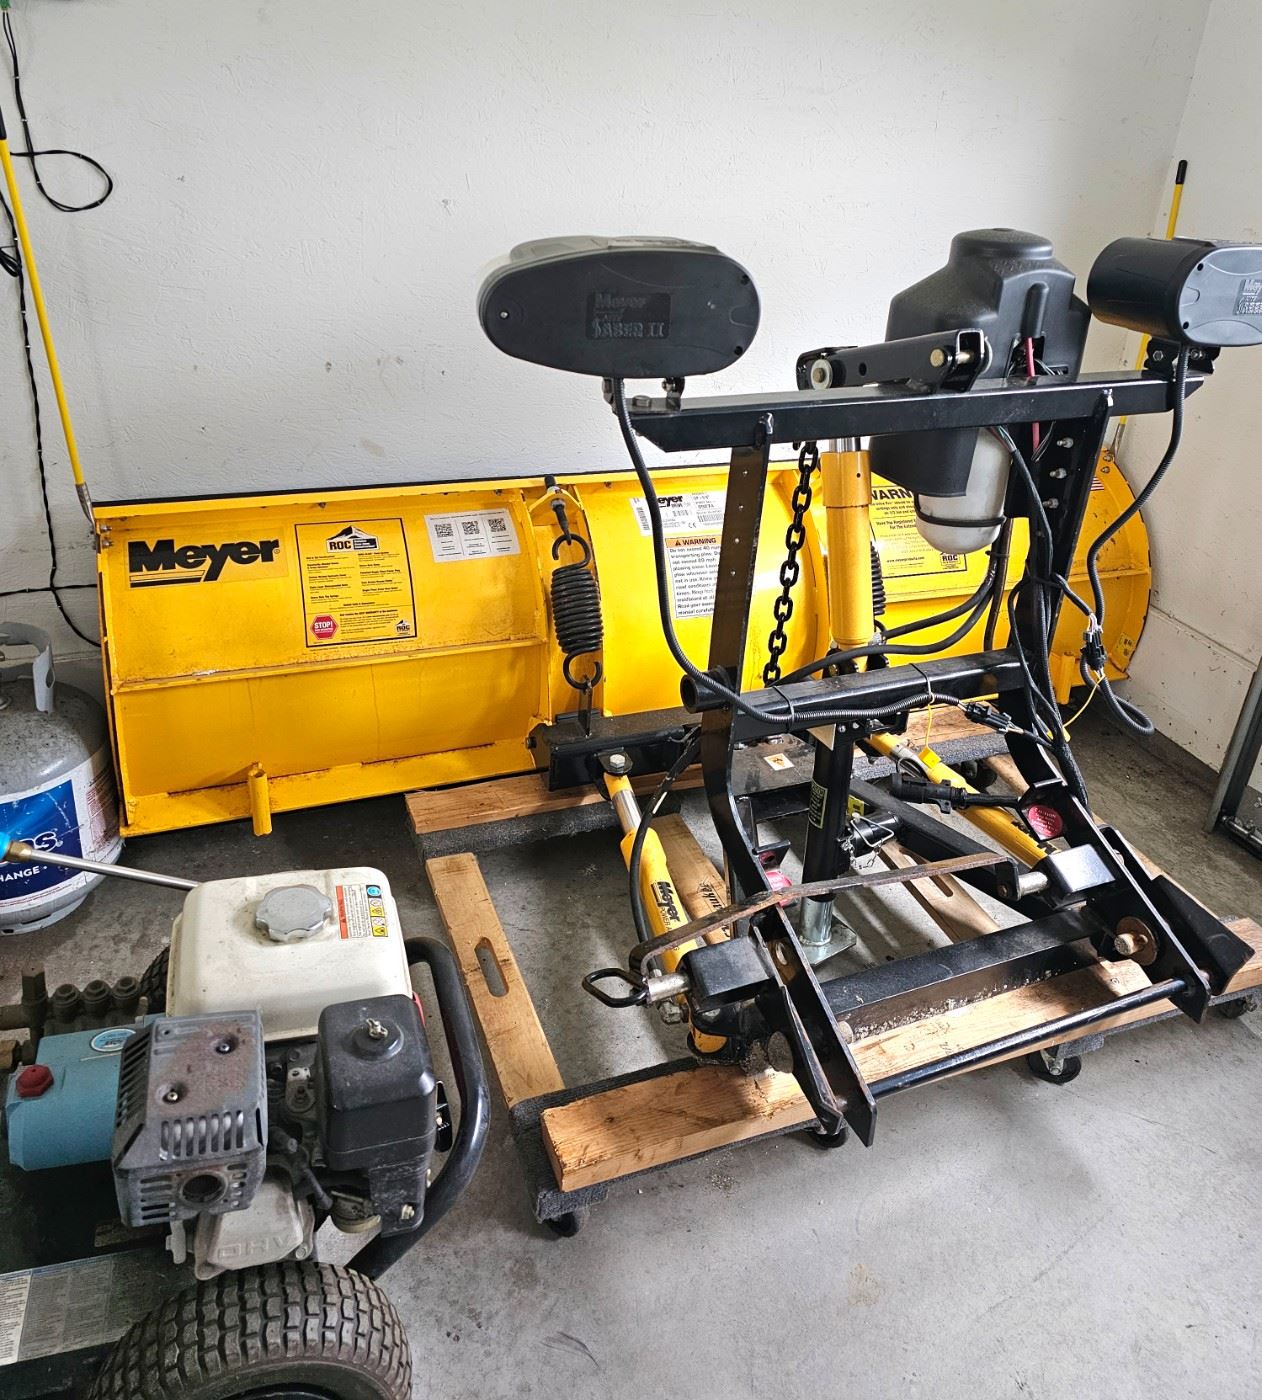 Next 6 pictures - Meyer Drive Pro 6' 8" EZ-Plus Mount Snow Plow! This plow is like new and is stored inside in the off season. Asking $3200 (New cost is between $5000-6200). Can be bundled with 2011 Nissan Frontier as has mount installed already. Call Bill at 419-360-2636 for any questions or to see the plow.  
                    *** Item is available for pre-sale ***